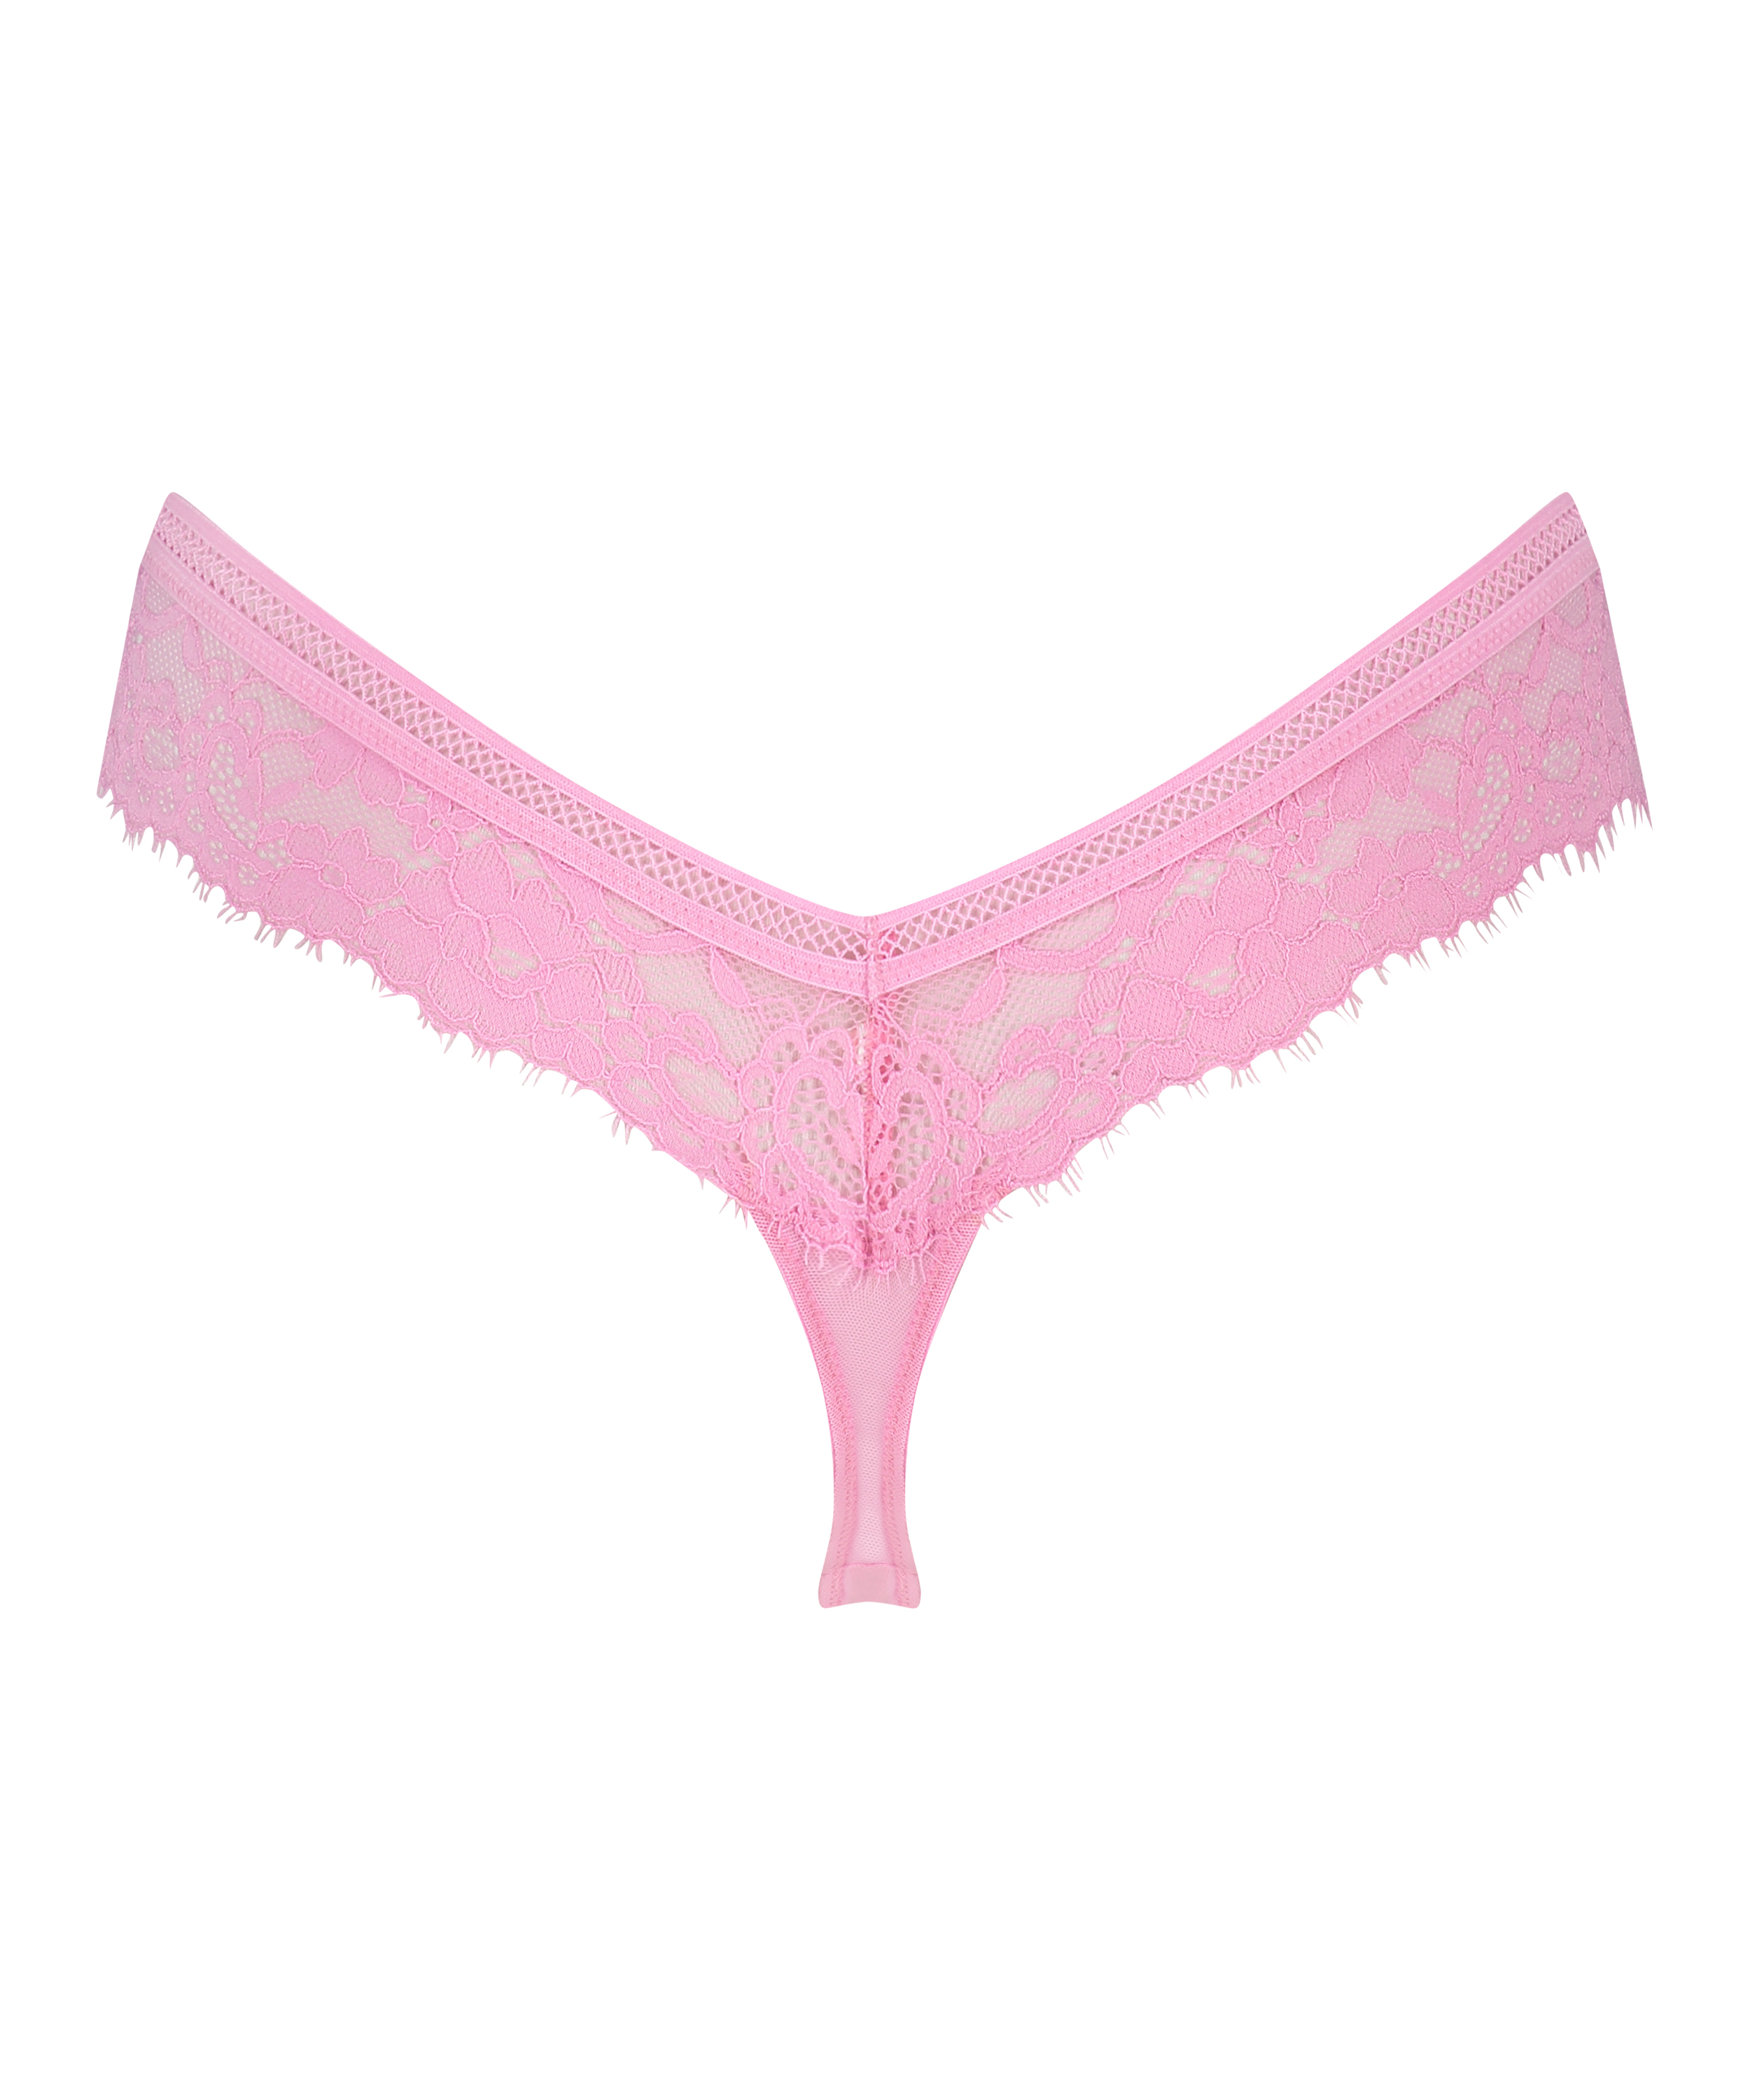 Gianni extra low rise thong, Pink, main